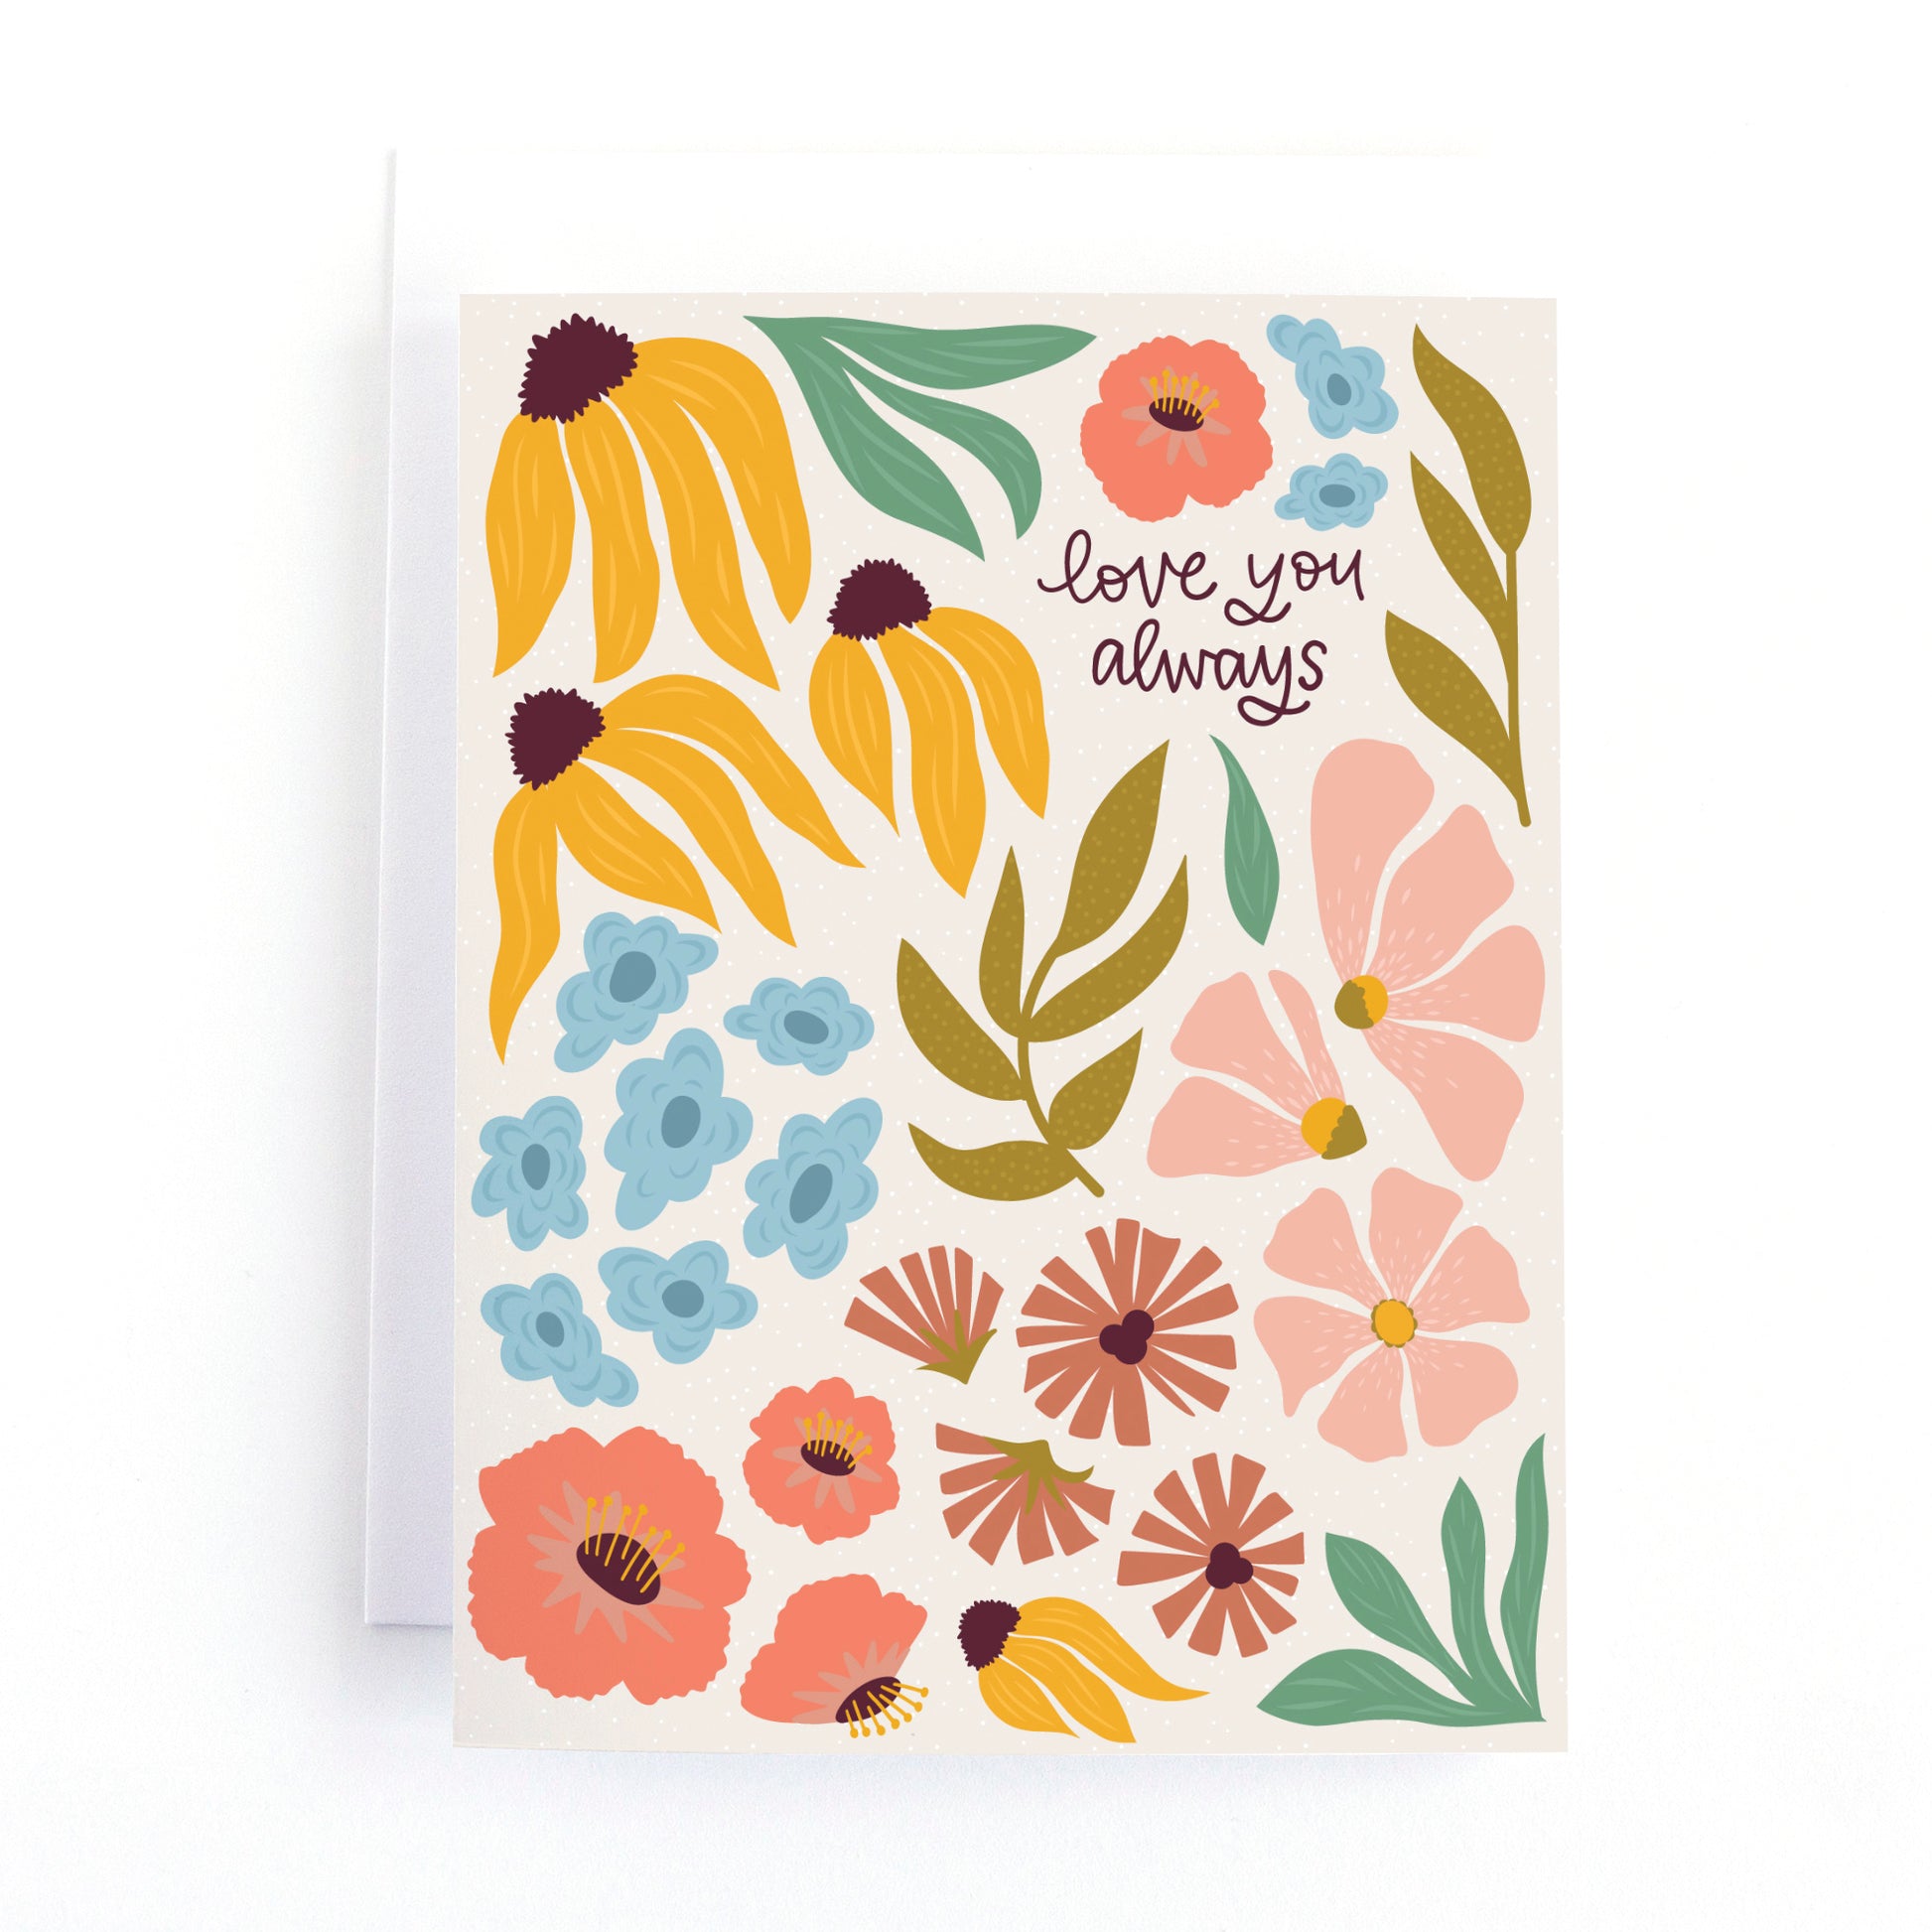 Floral Valentine's day card with illustrations of wild flowers and the text love you always